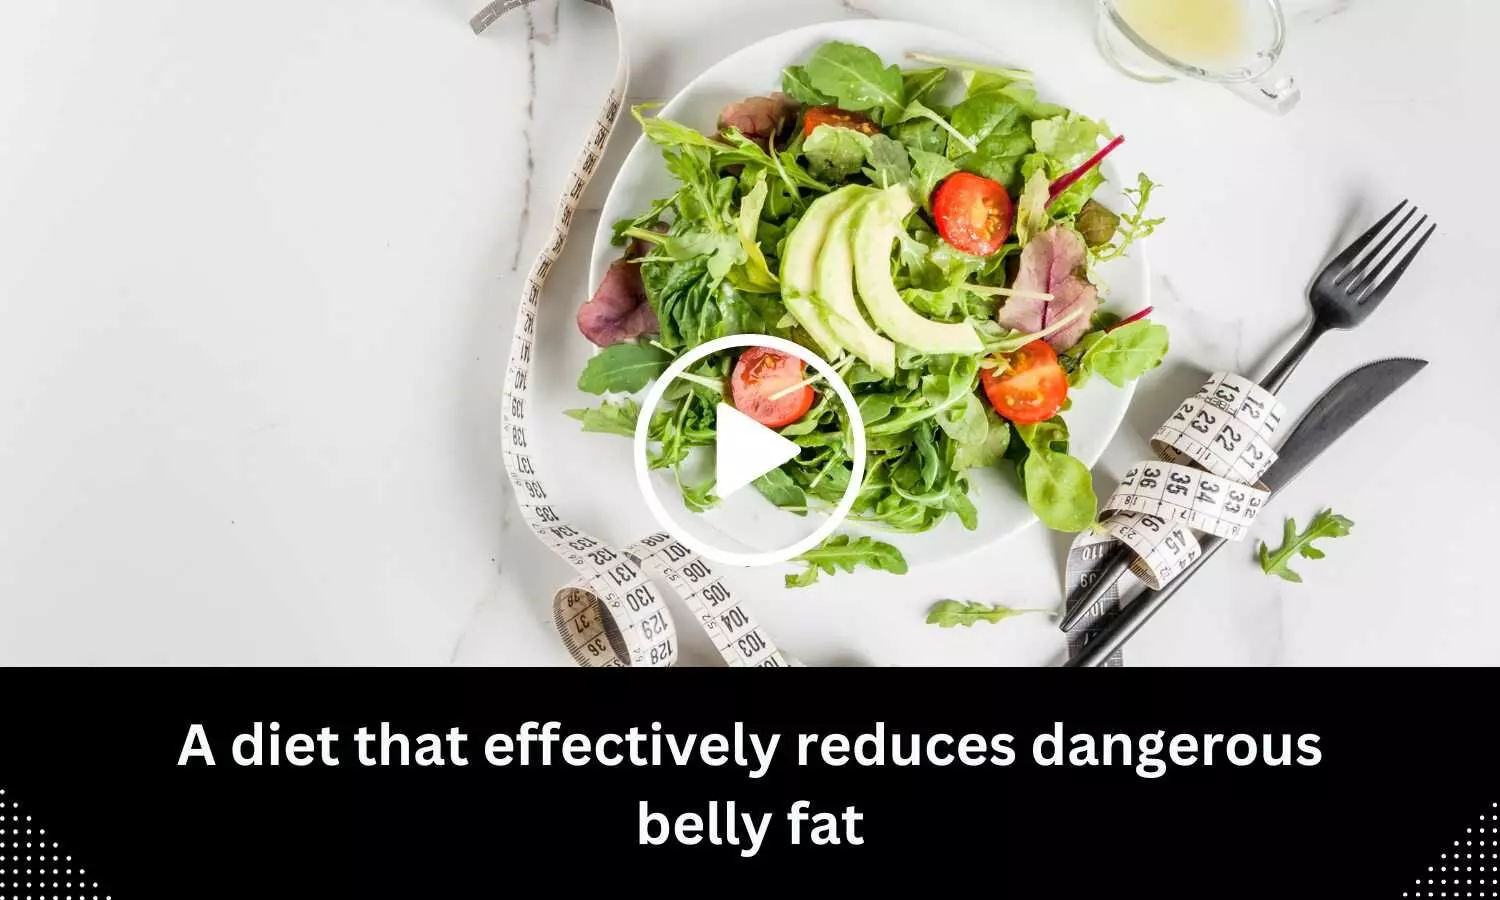 A diet that effectively reduces dangerous belly fat